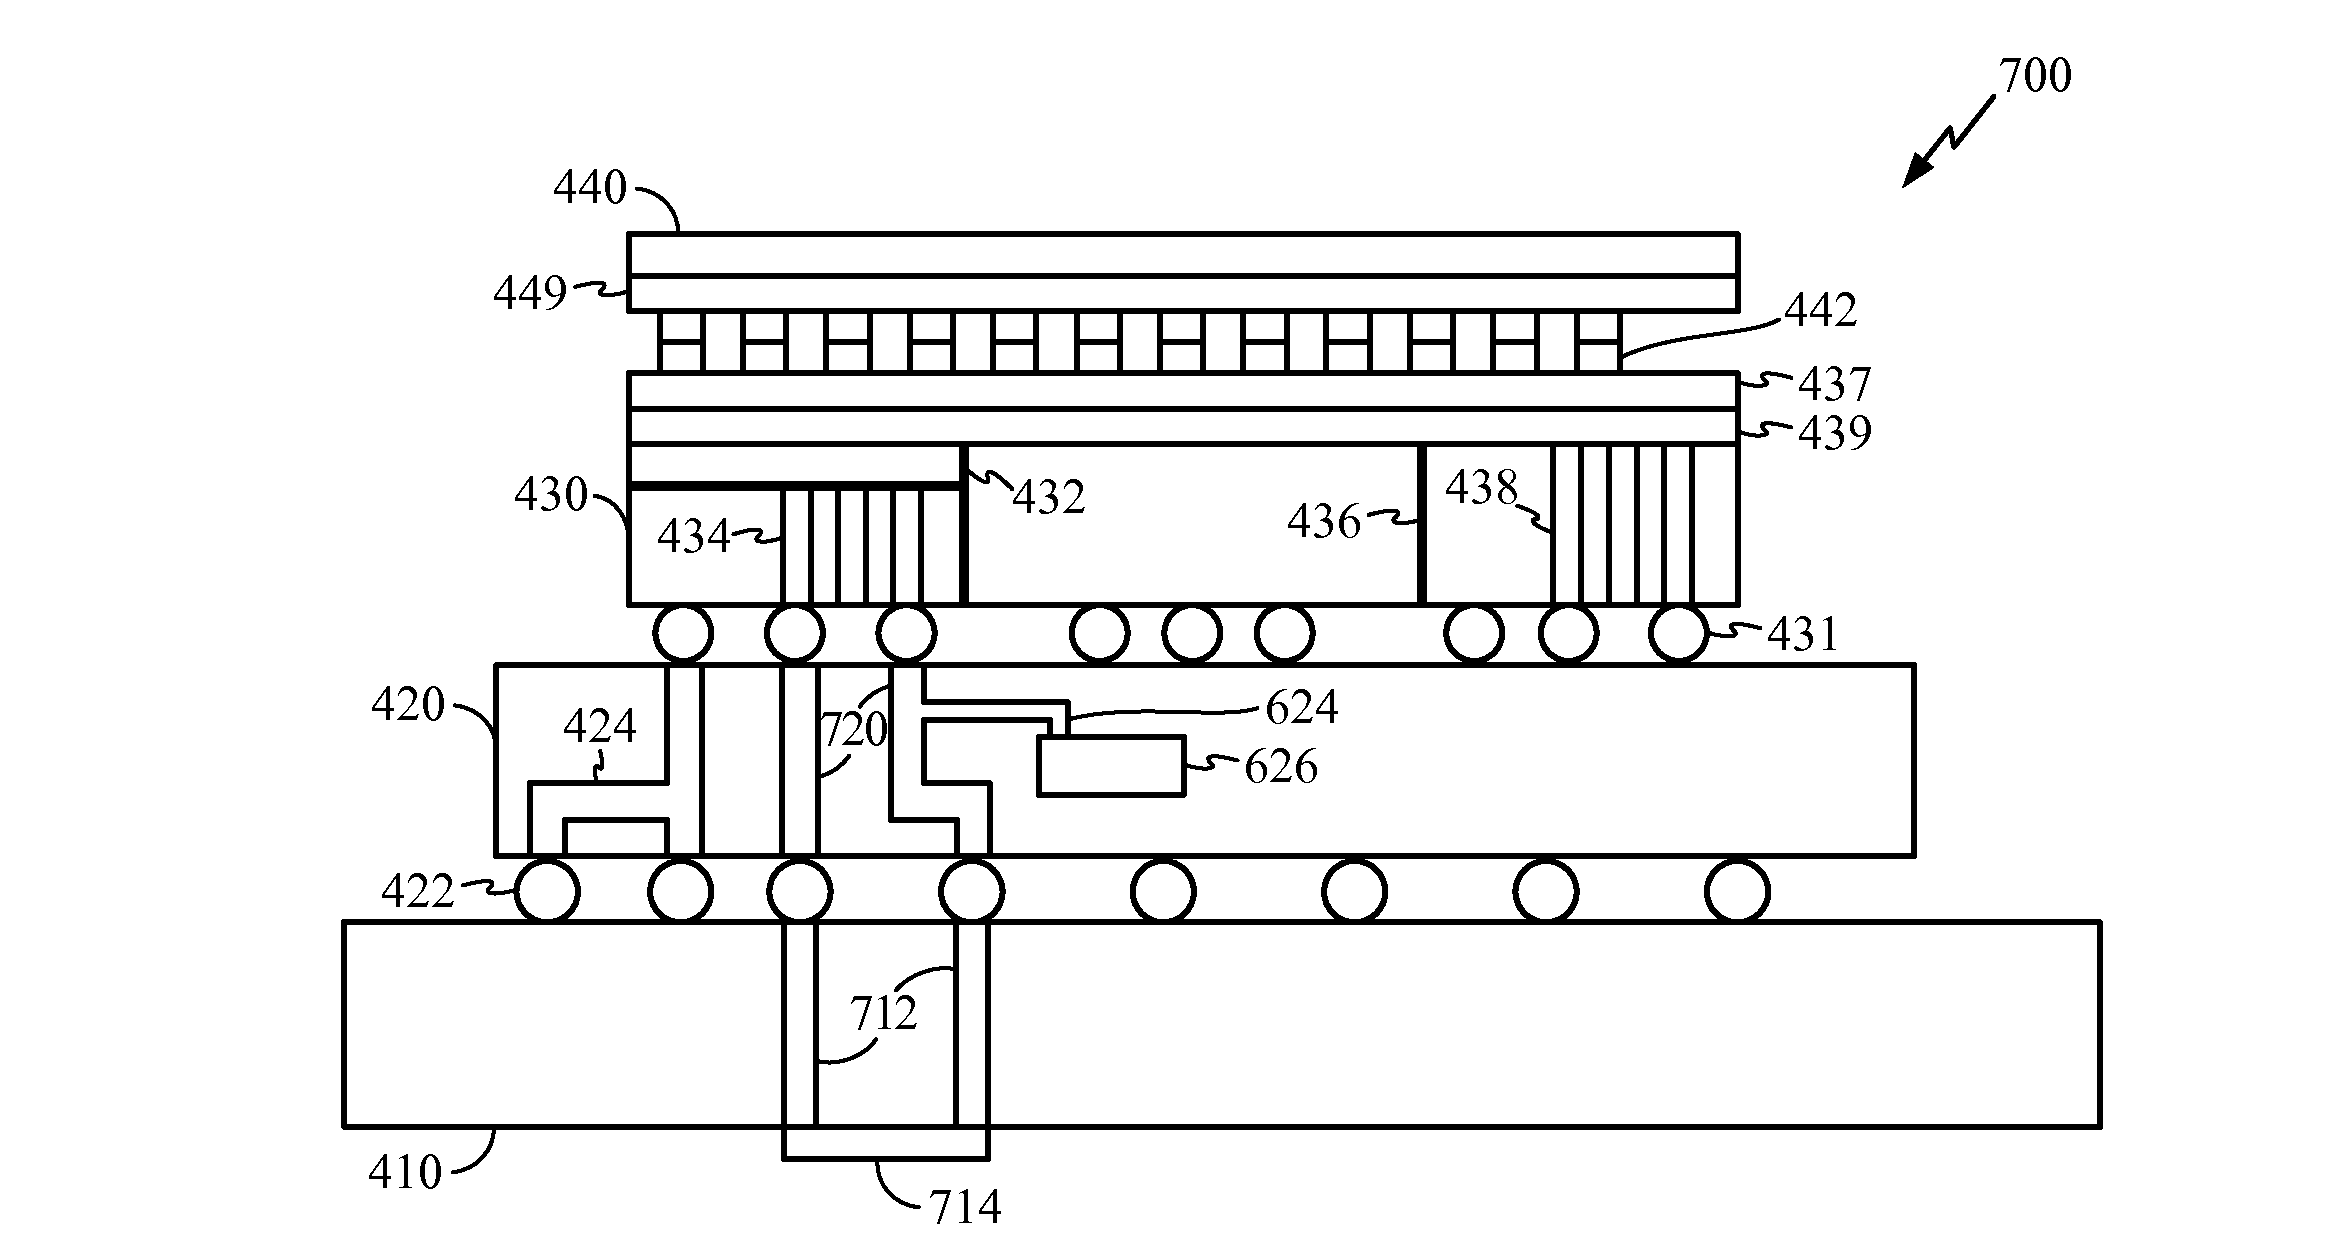 Integrated Voltage Regulator with Embedded Passive Device(s) for a Stacked IC